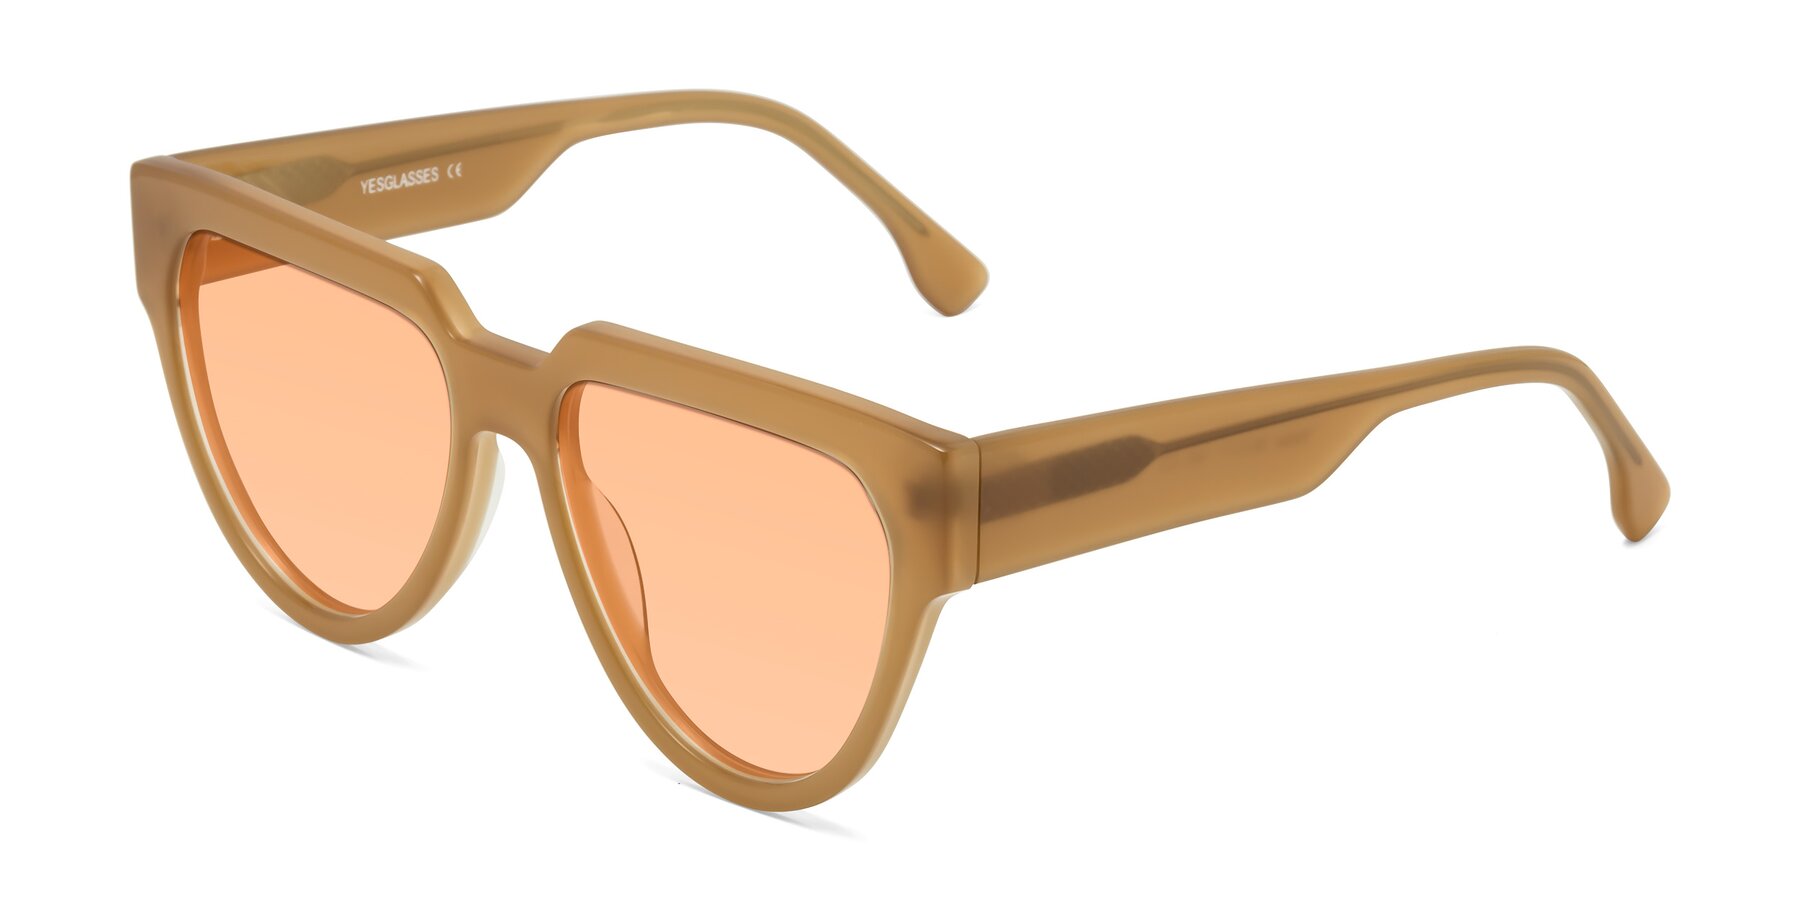 Angle of Yorke in Caramel with Light Orange Tinted Lenses